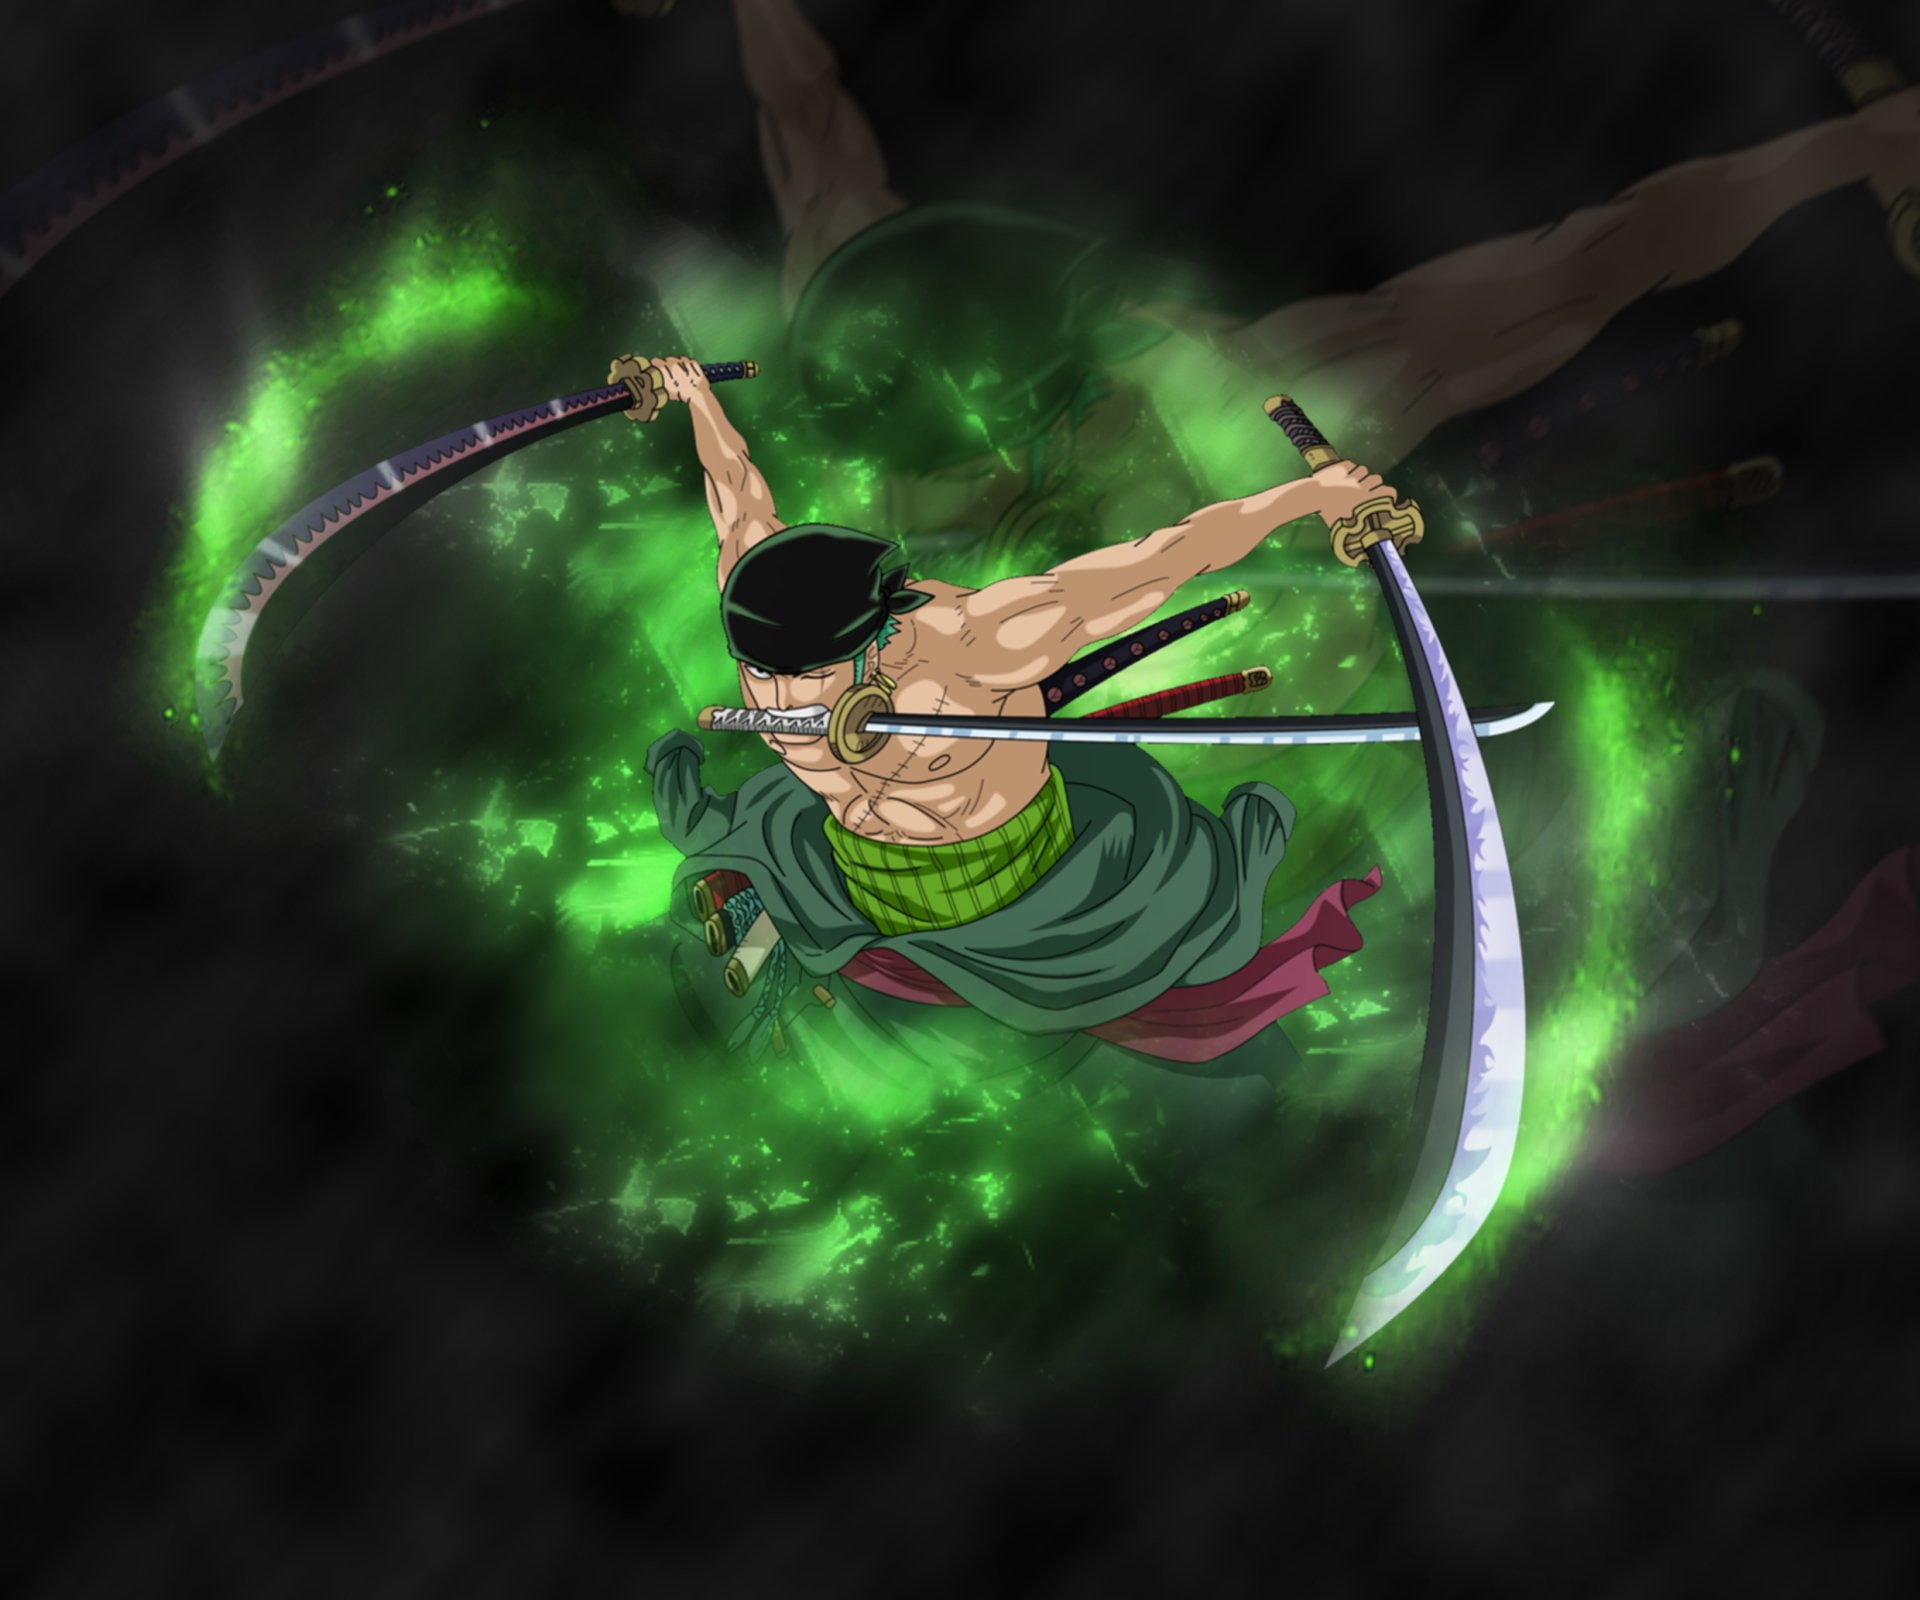 Anime, One Piece, one person, adult, green color, women, smoke - physical structure